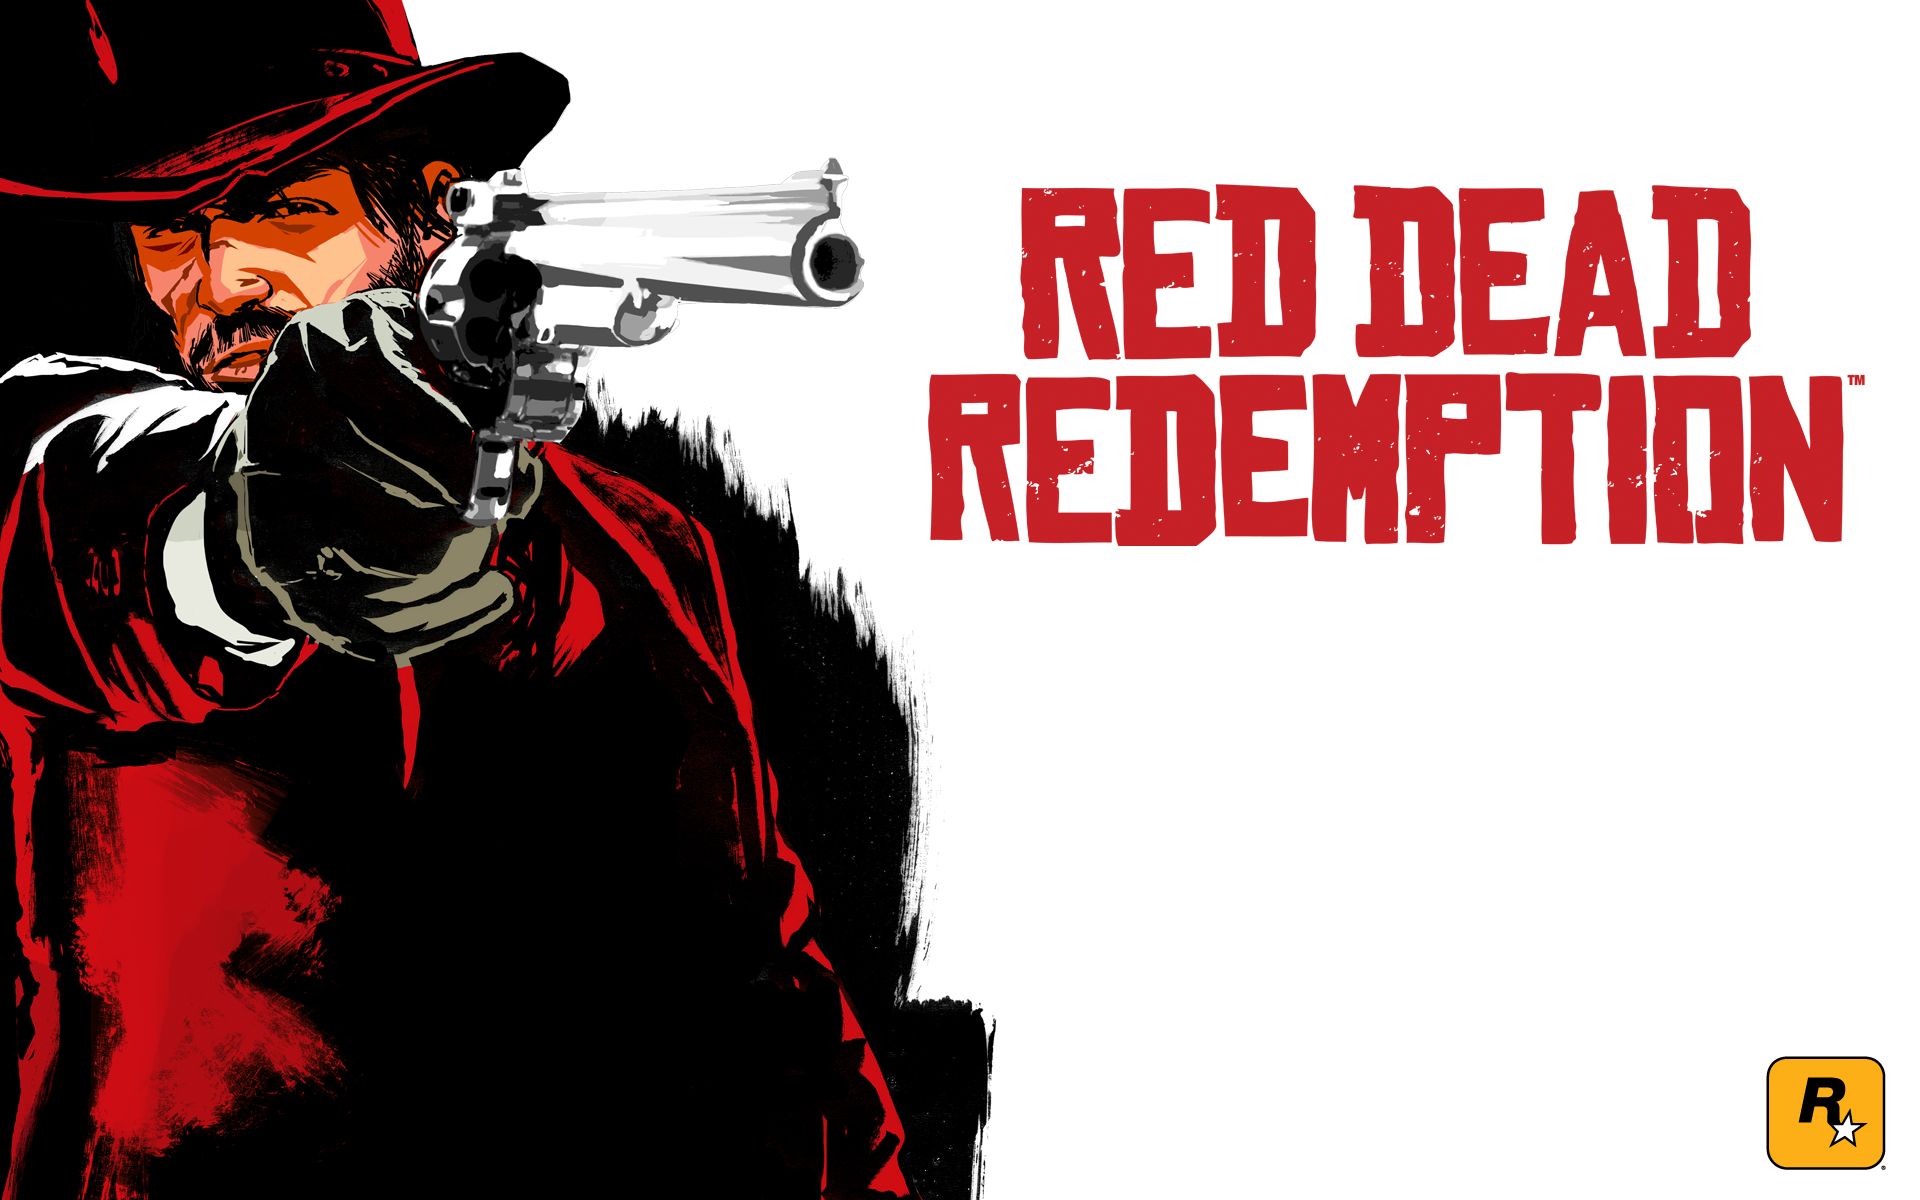 red dead redemption wallpaper,font,games,album cover,poster,movie